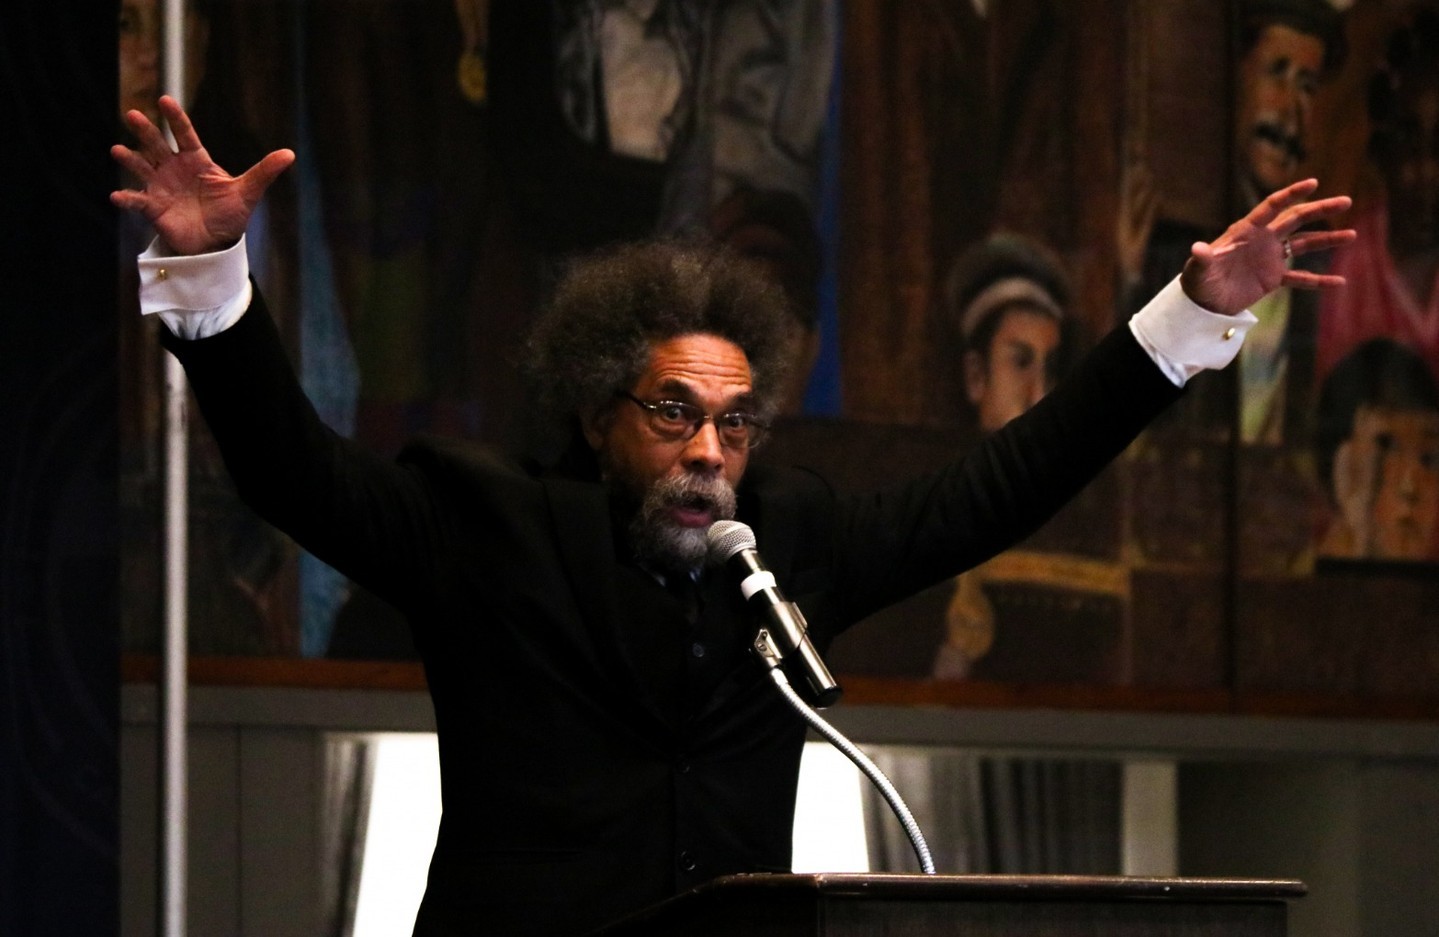 Missed Dr.Cornel West's amazing visit to Cabrini? Check out the story in our bio to hear about @brothercornelwest time at the Shirley Dixon Urban Education Symposium.⁠
✍️:@prizzys.life⁠
📸:@scottlightreels⁠
#loquiturmedia #studentnews #collegenewspaper #cabriniuniversity⁠#Cornelwest⁠